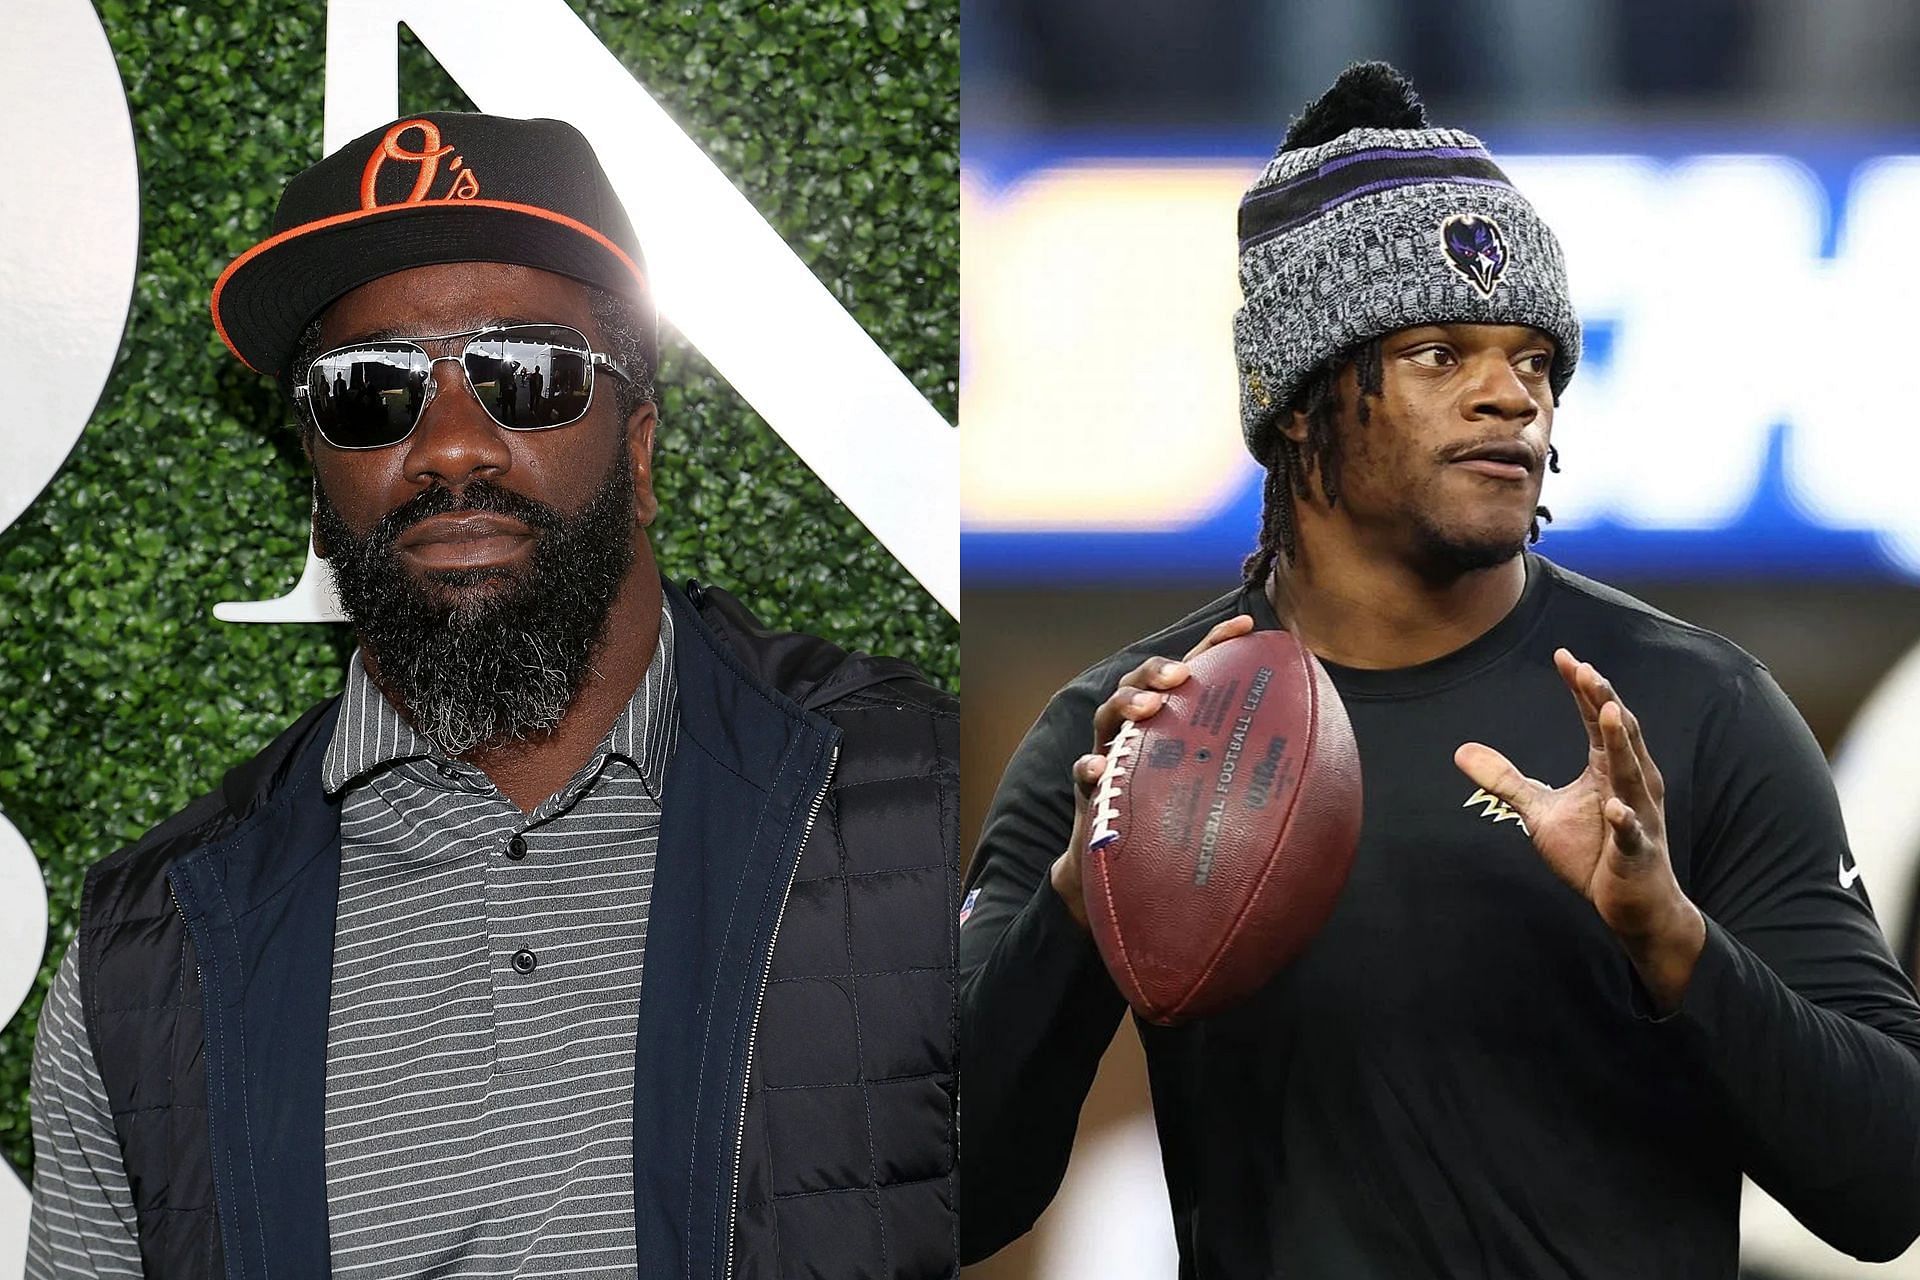 Ravens legend Ed Reed sets expectation for Lamar Jackson to bring third Super Bowl to Baltimore